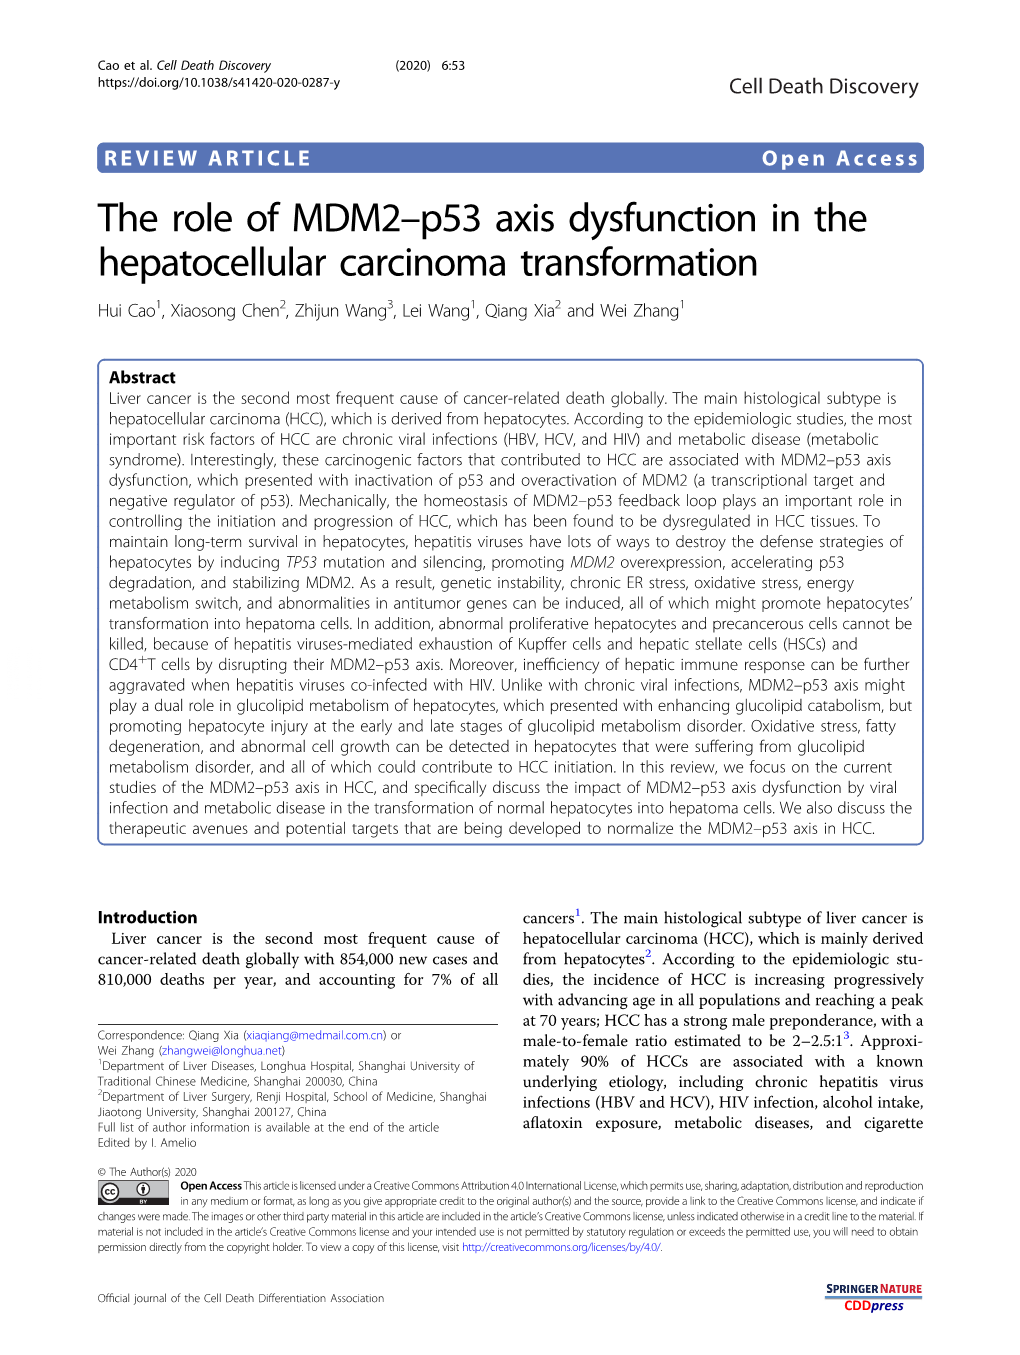 The Role of MDM2–P53 Axis Dysfunction in the Hepatocellular